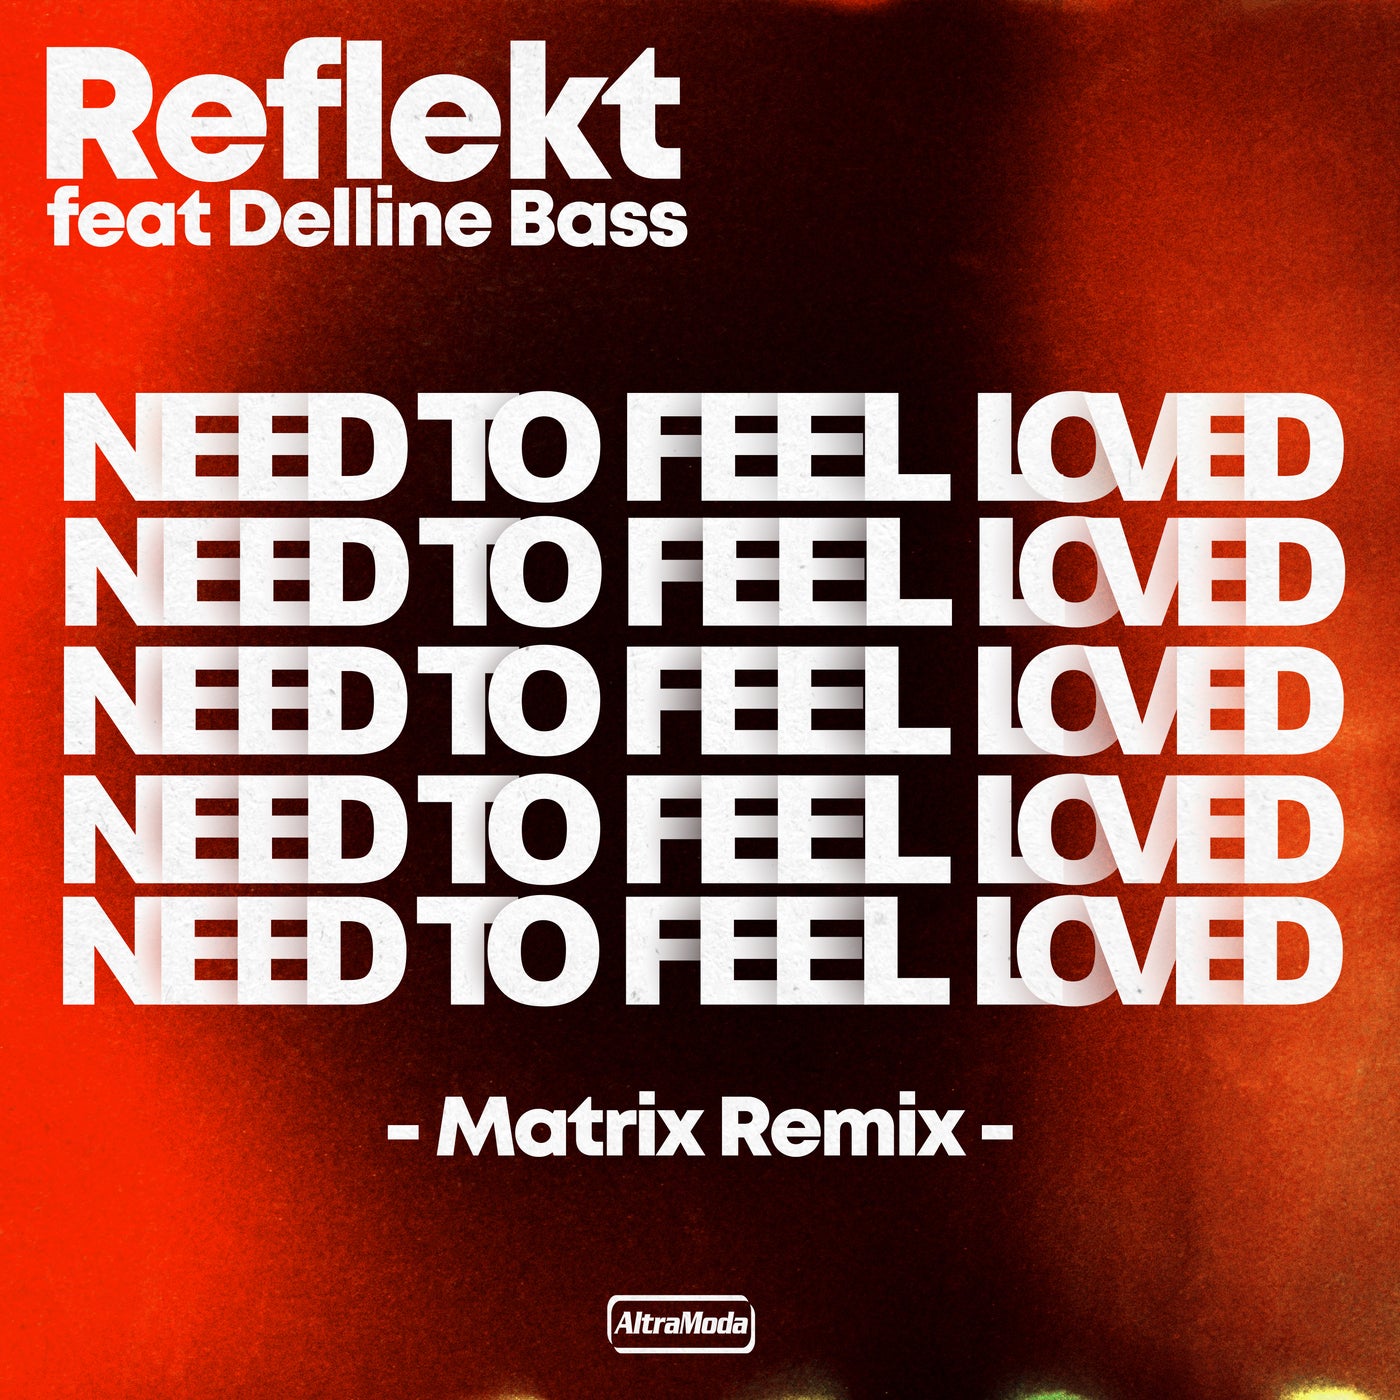 Need To Feel Loved - Matrix Remix